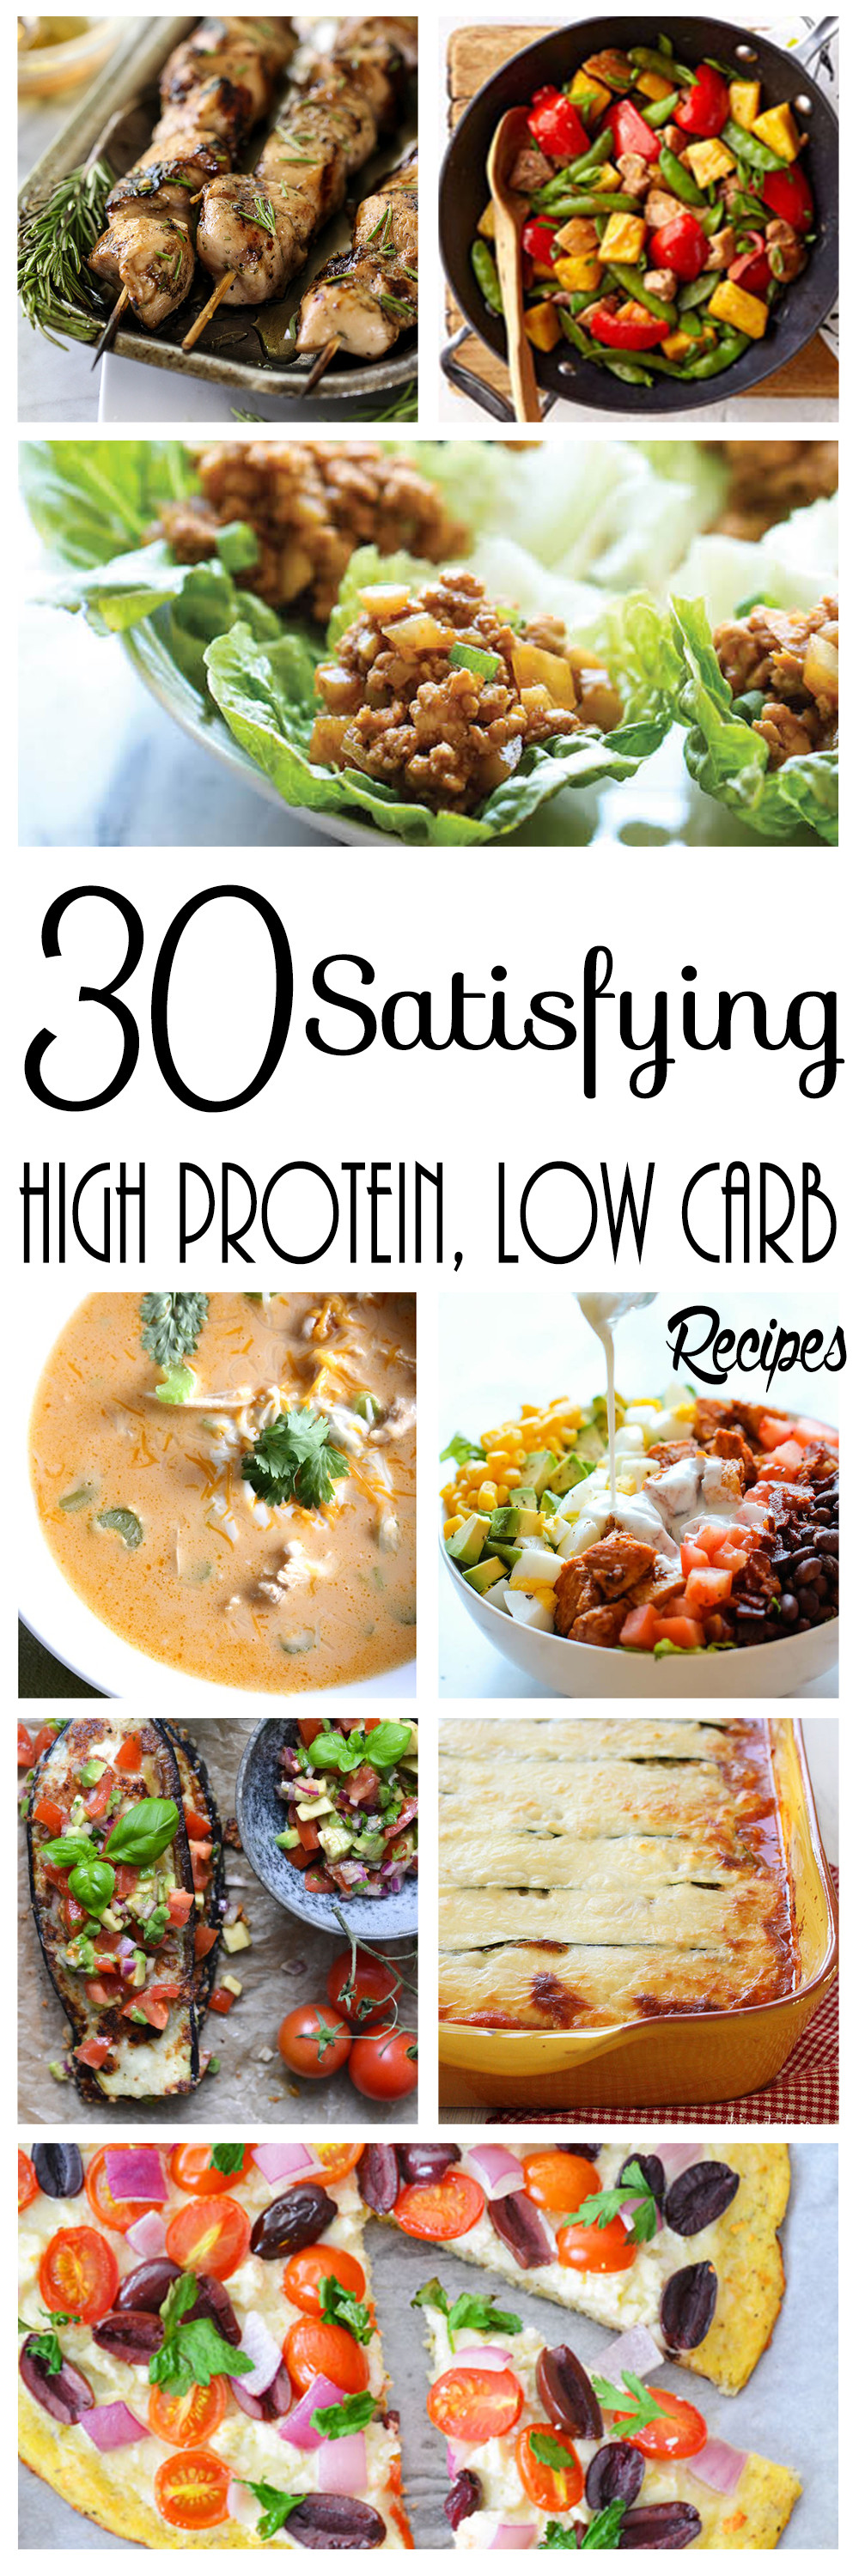 Healthy Low Carb High Protein Snacks
 30 Satisfying High Protein Low Carb Recipes FULL